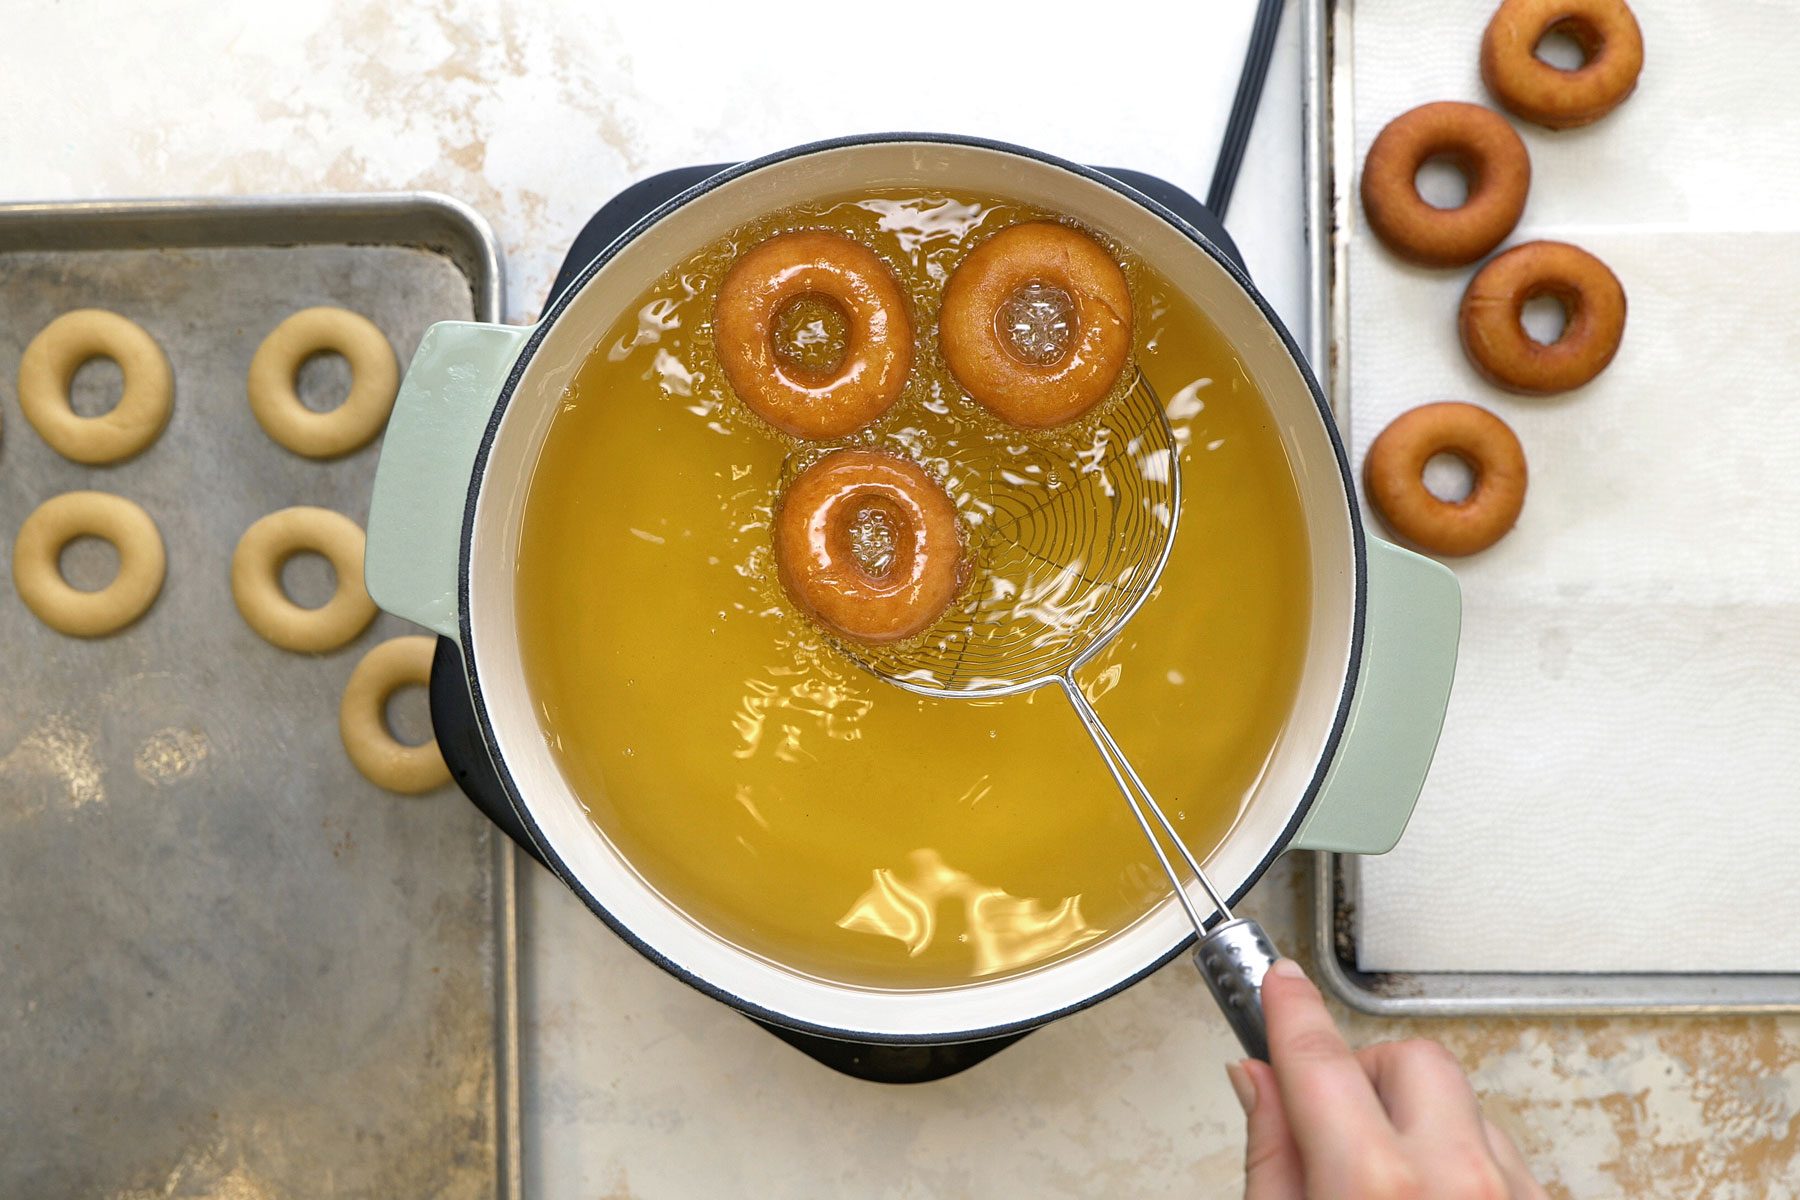 Frying the doughnuts in oil inside a large pan